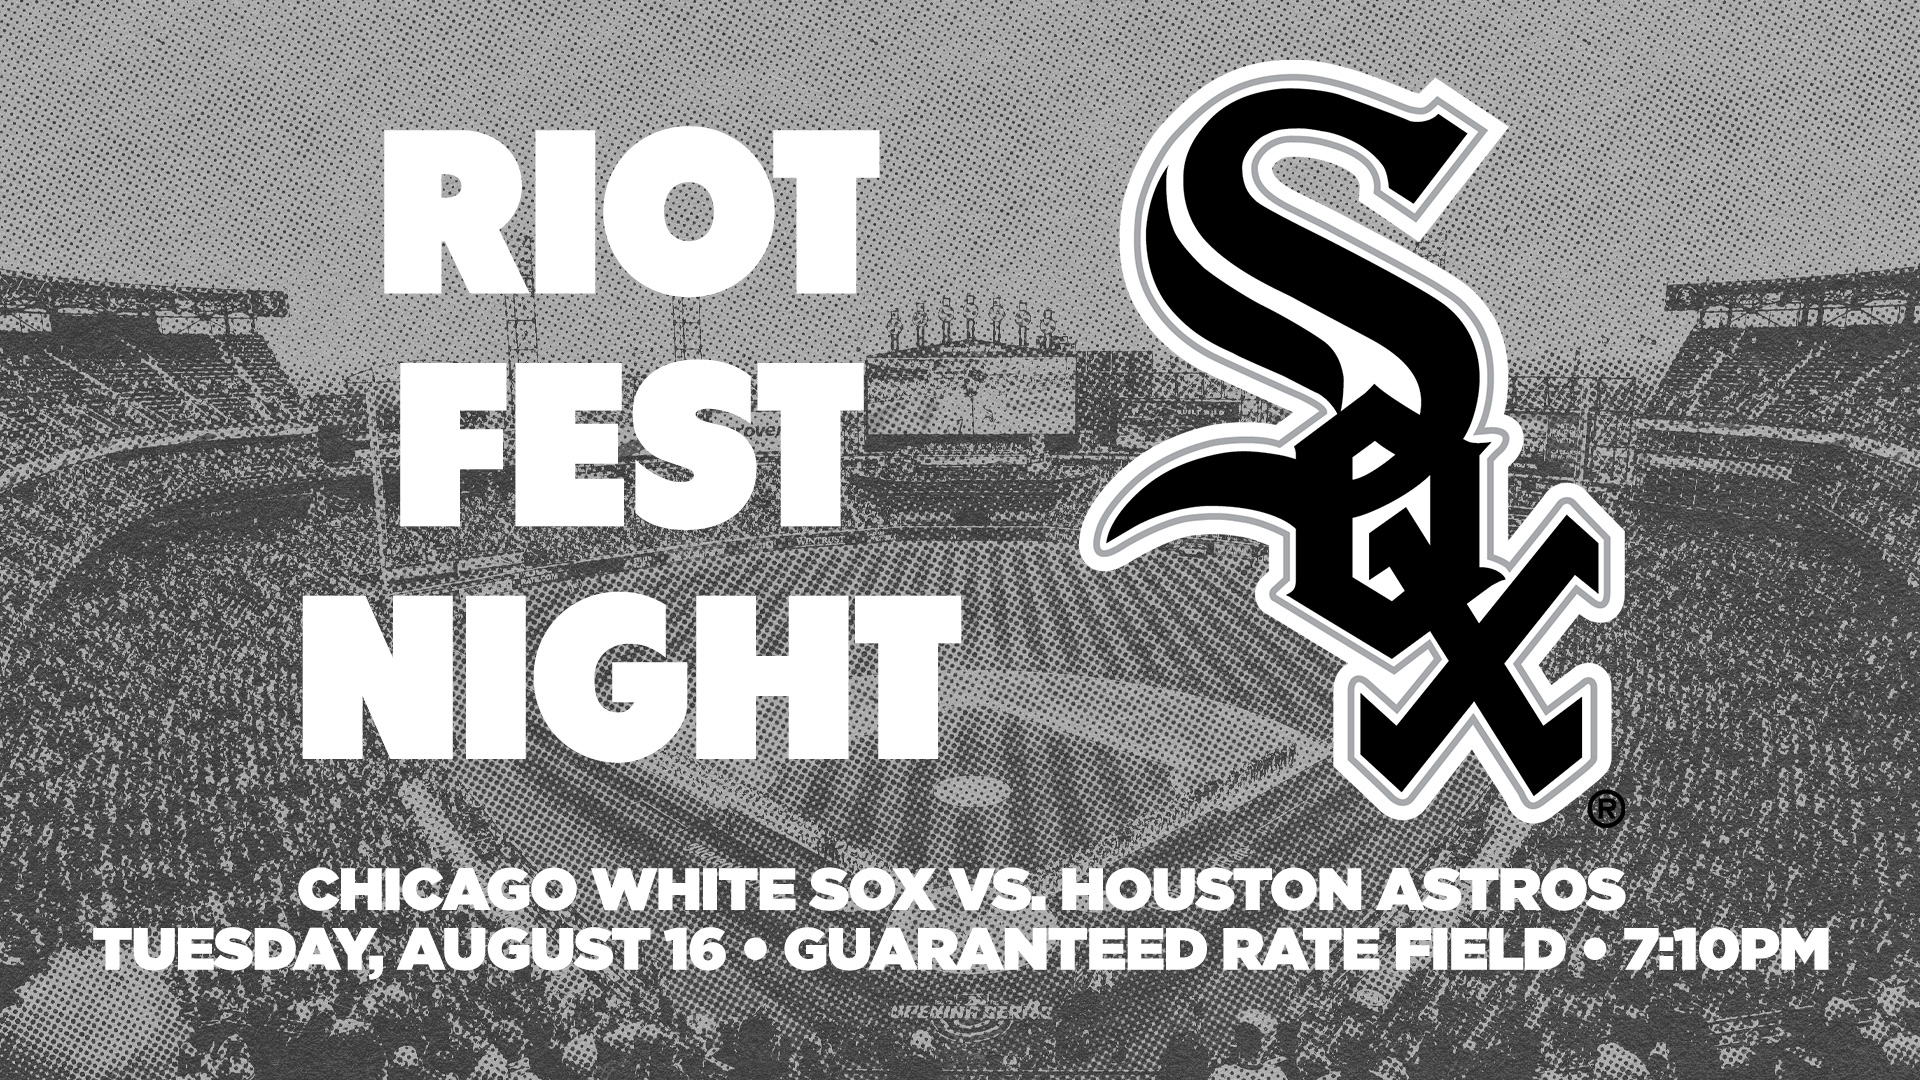 Chicago White Sox to host inaugural ChiSox Craft Beer Fest - Eater